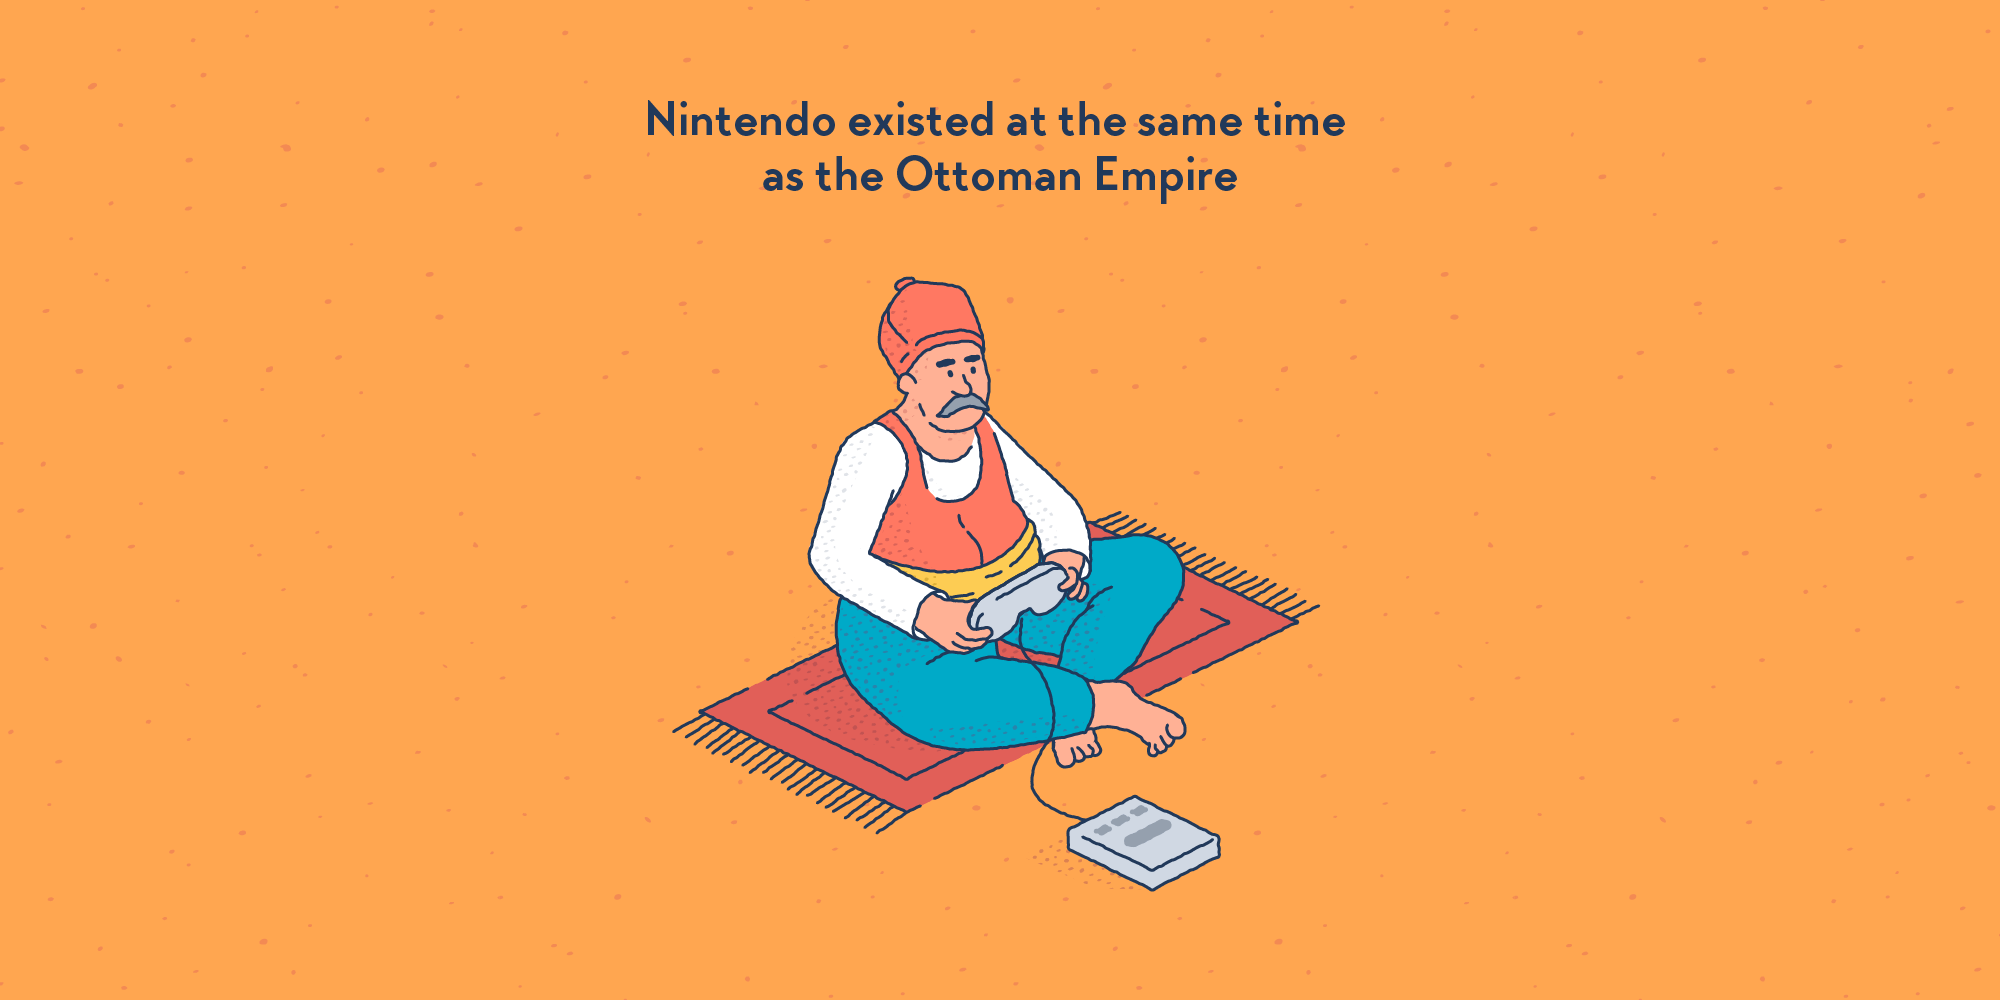 An Ottoman emperor sitting on a carpet and playing the Super Nintendo.